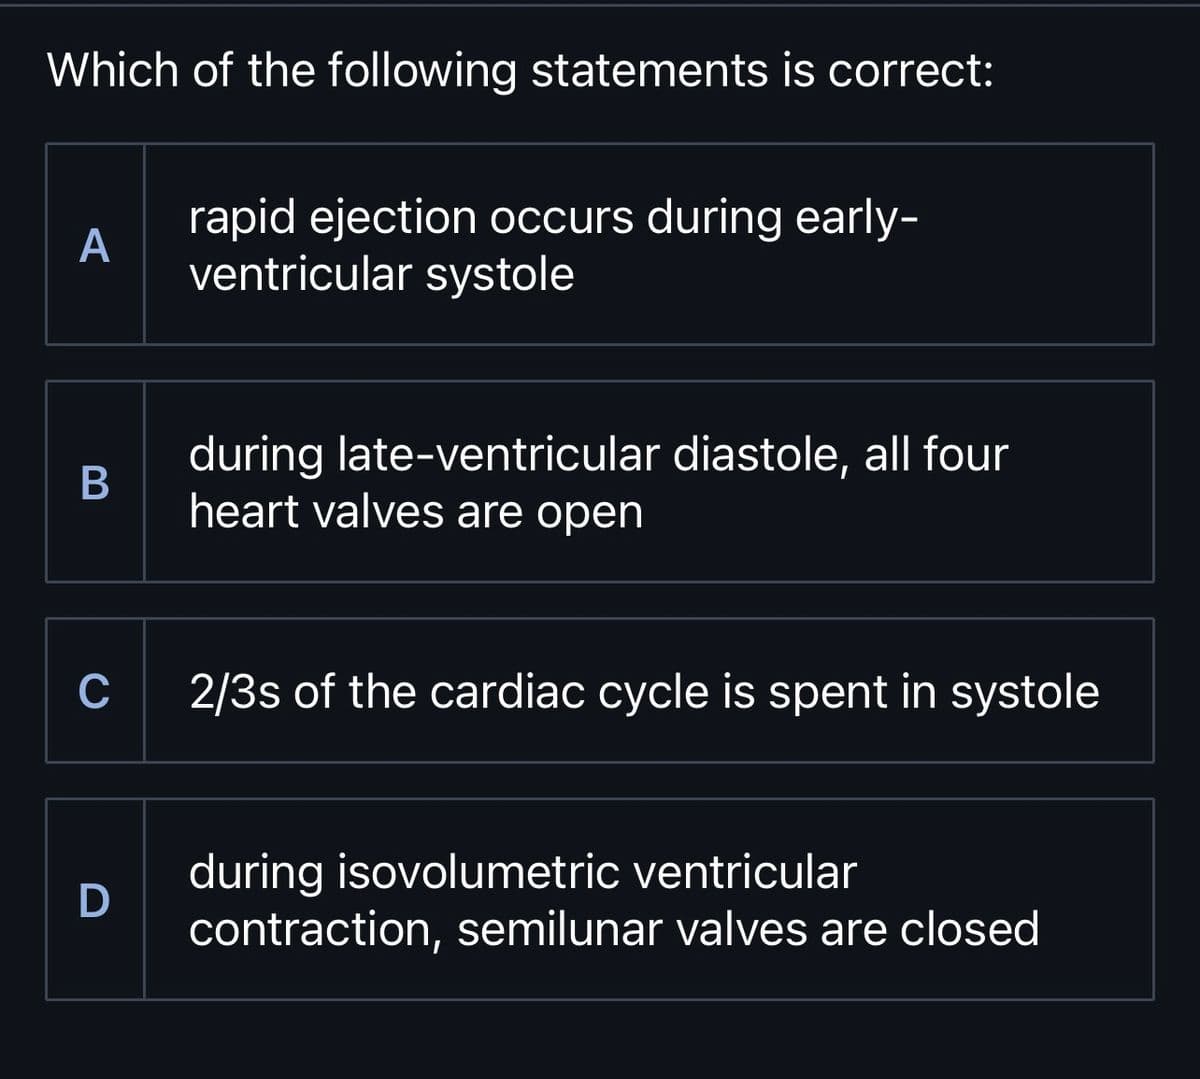 Which of the following statements is correct:
A
rapid ejection occurs during early-
ventricular systole
B
during late-ventricular diastole, all four
heart valves are open
C
2/3s of the cardiac cycle is spent in systole
during isovolumetric ventricular
D
contraction, semilunar valves are closed